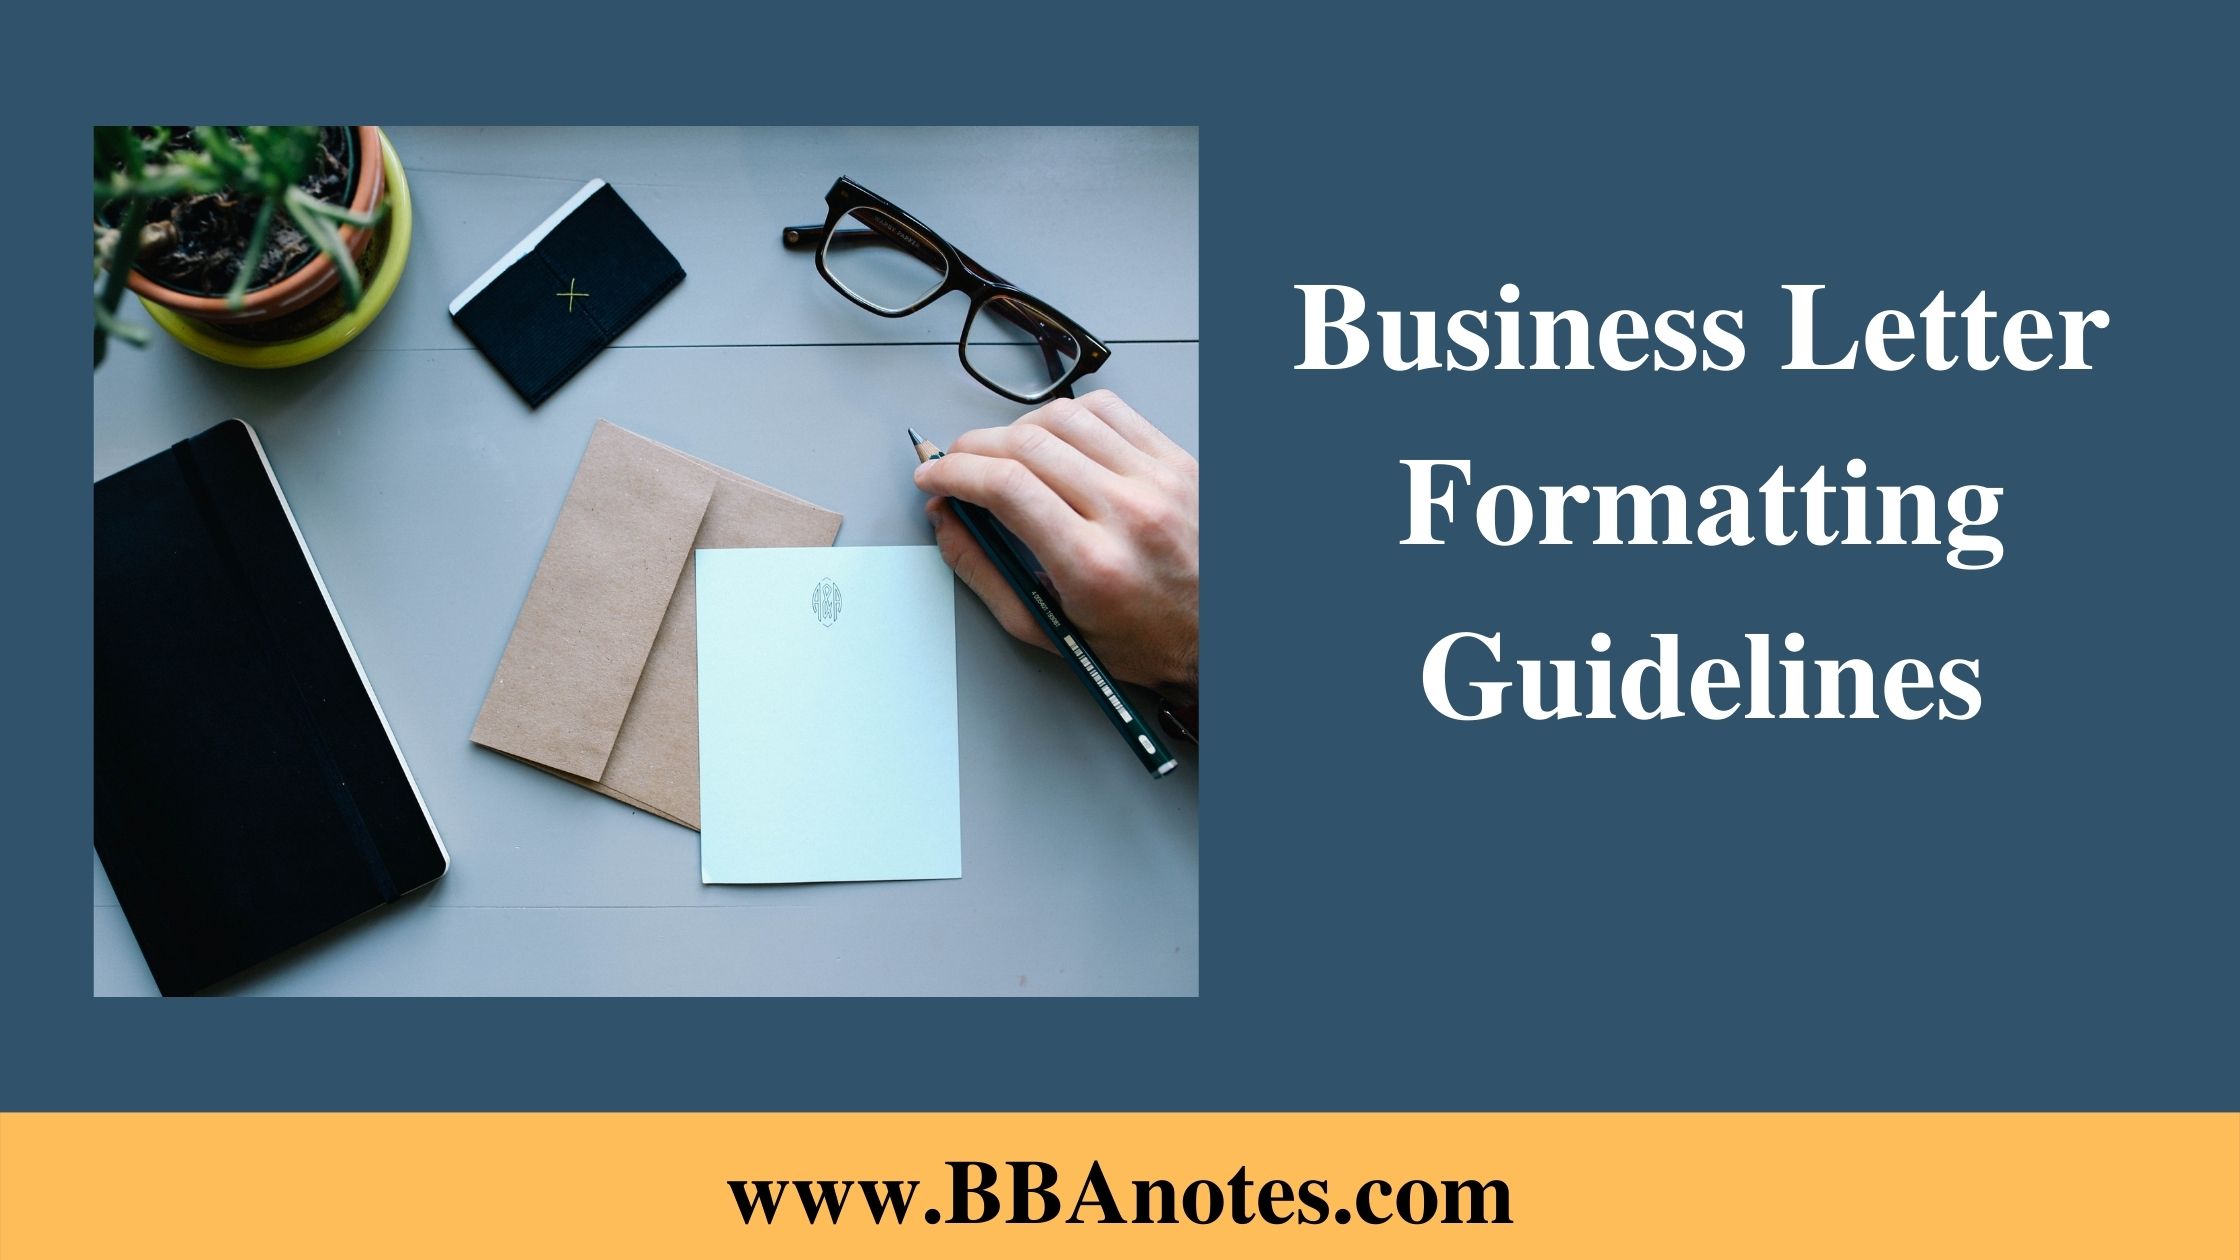 Business Letter Formatting Guidelines